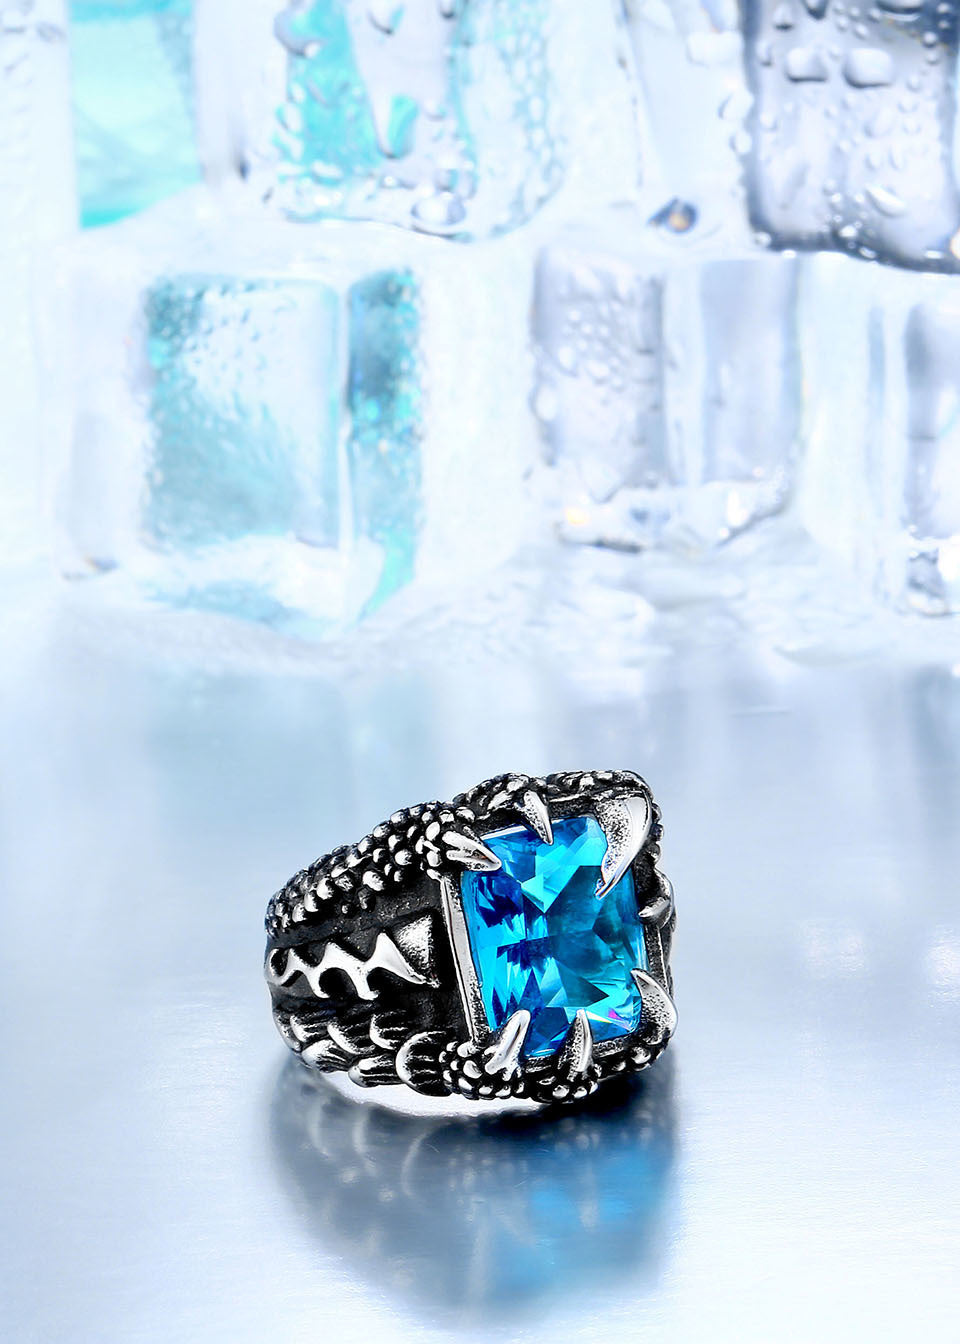 Dragon Claw Ring With Red/Blue/Black Stone